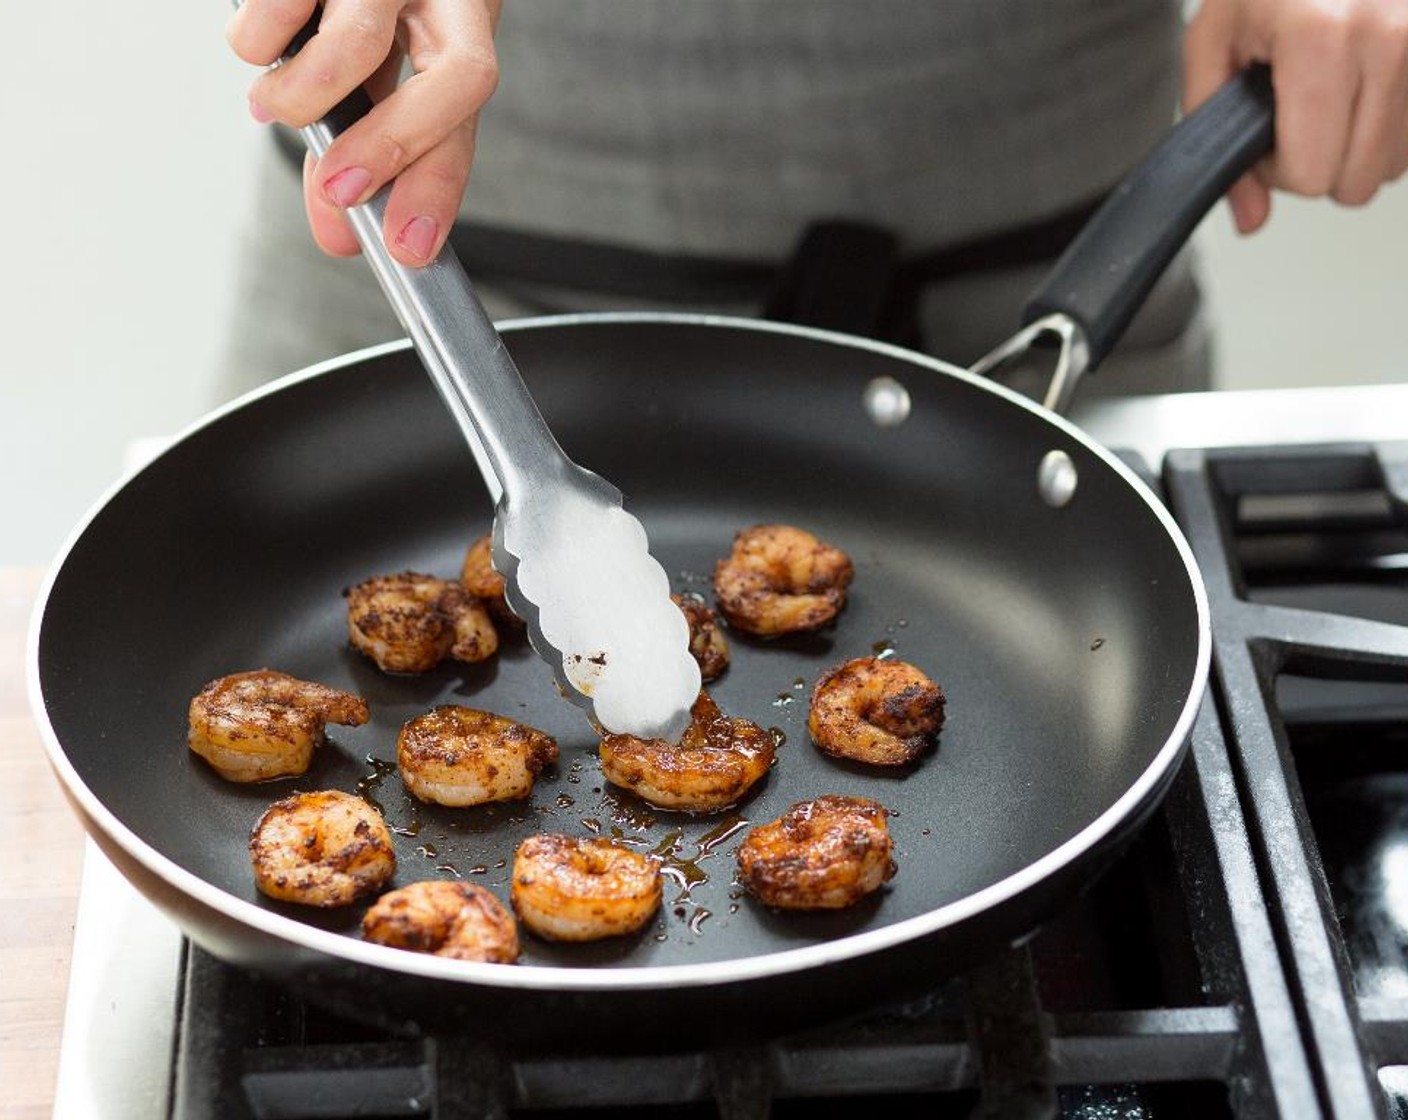 step 10 Heat a large non-stick sauté pan withCanola Oil (1/2 Tbsp) over medium-high heat. When hot, add the shrimp in a single layer and cook for 3 to 5 minutes, stirring occasionally. When the shrimp are pink and opaque, remove from heat and keep warm for plating.